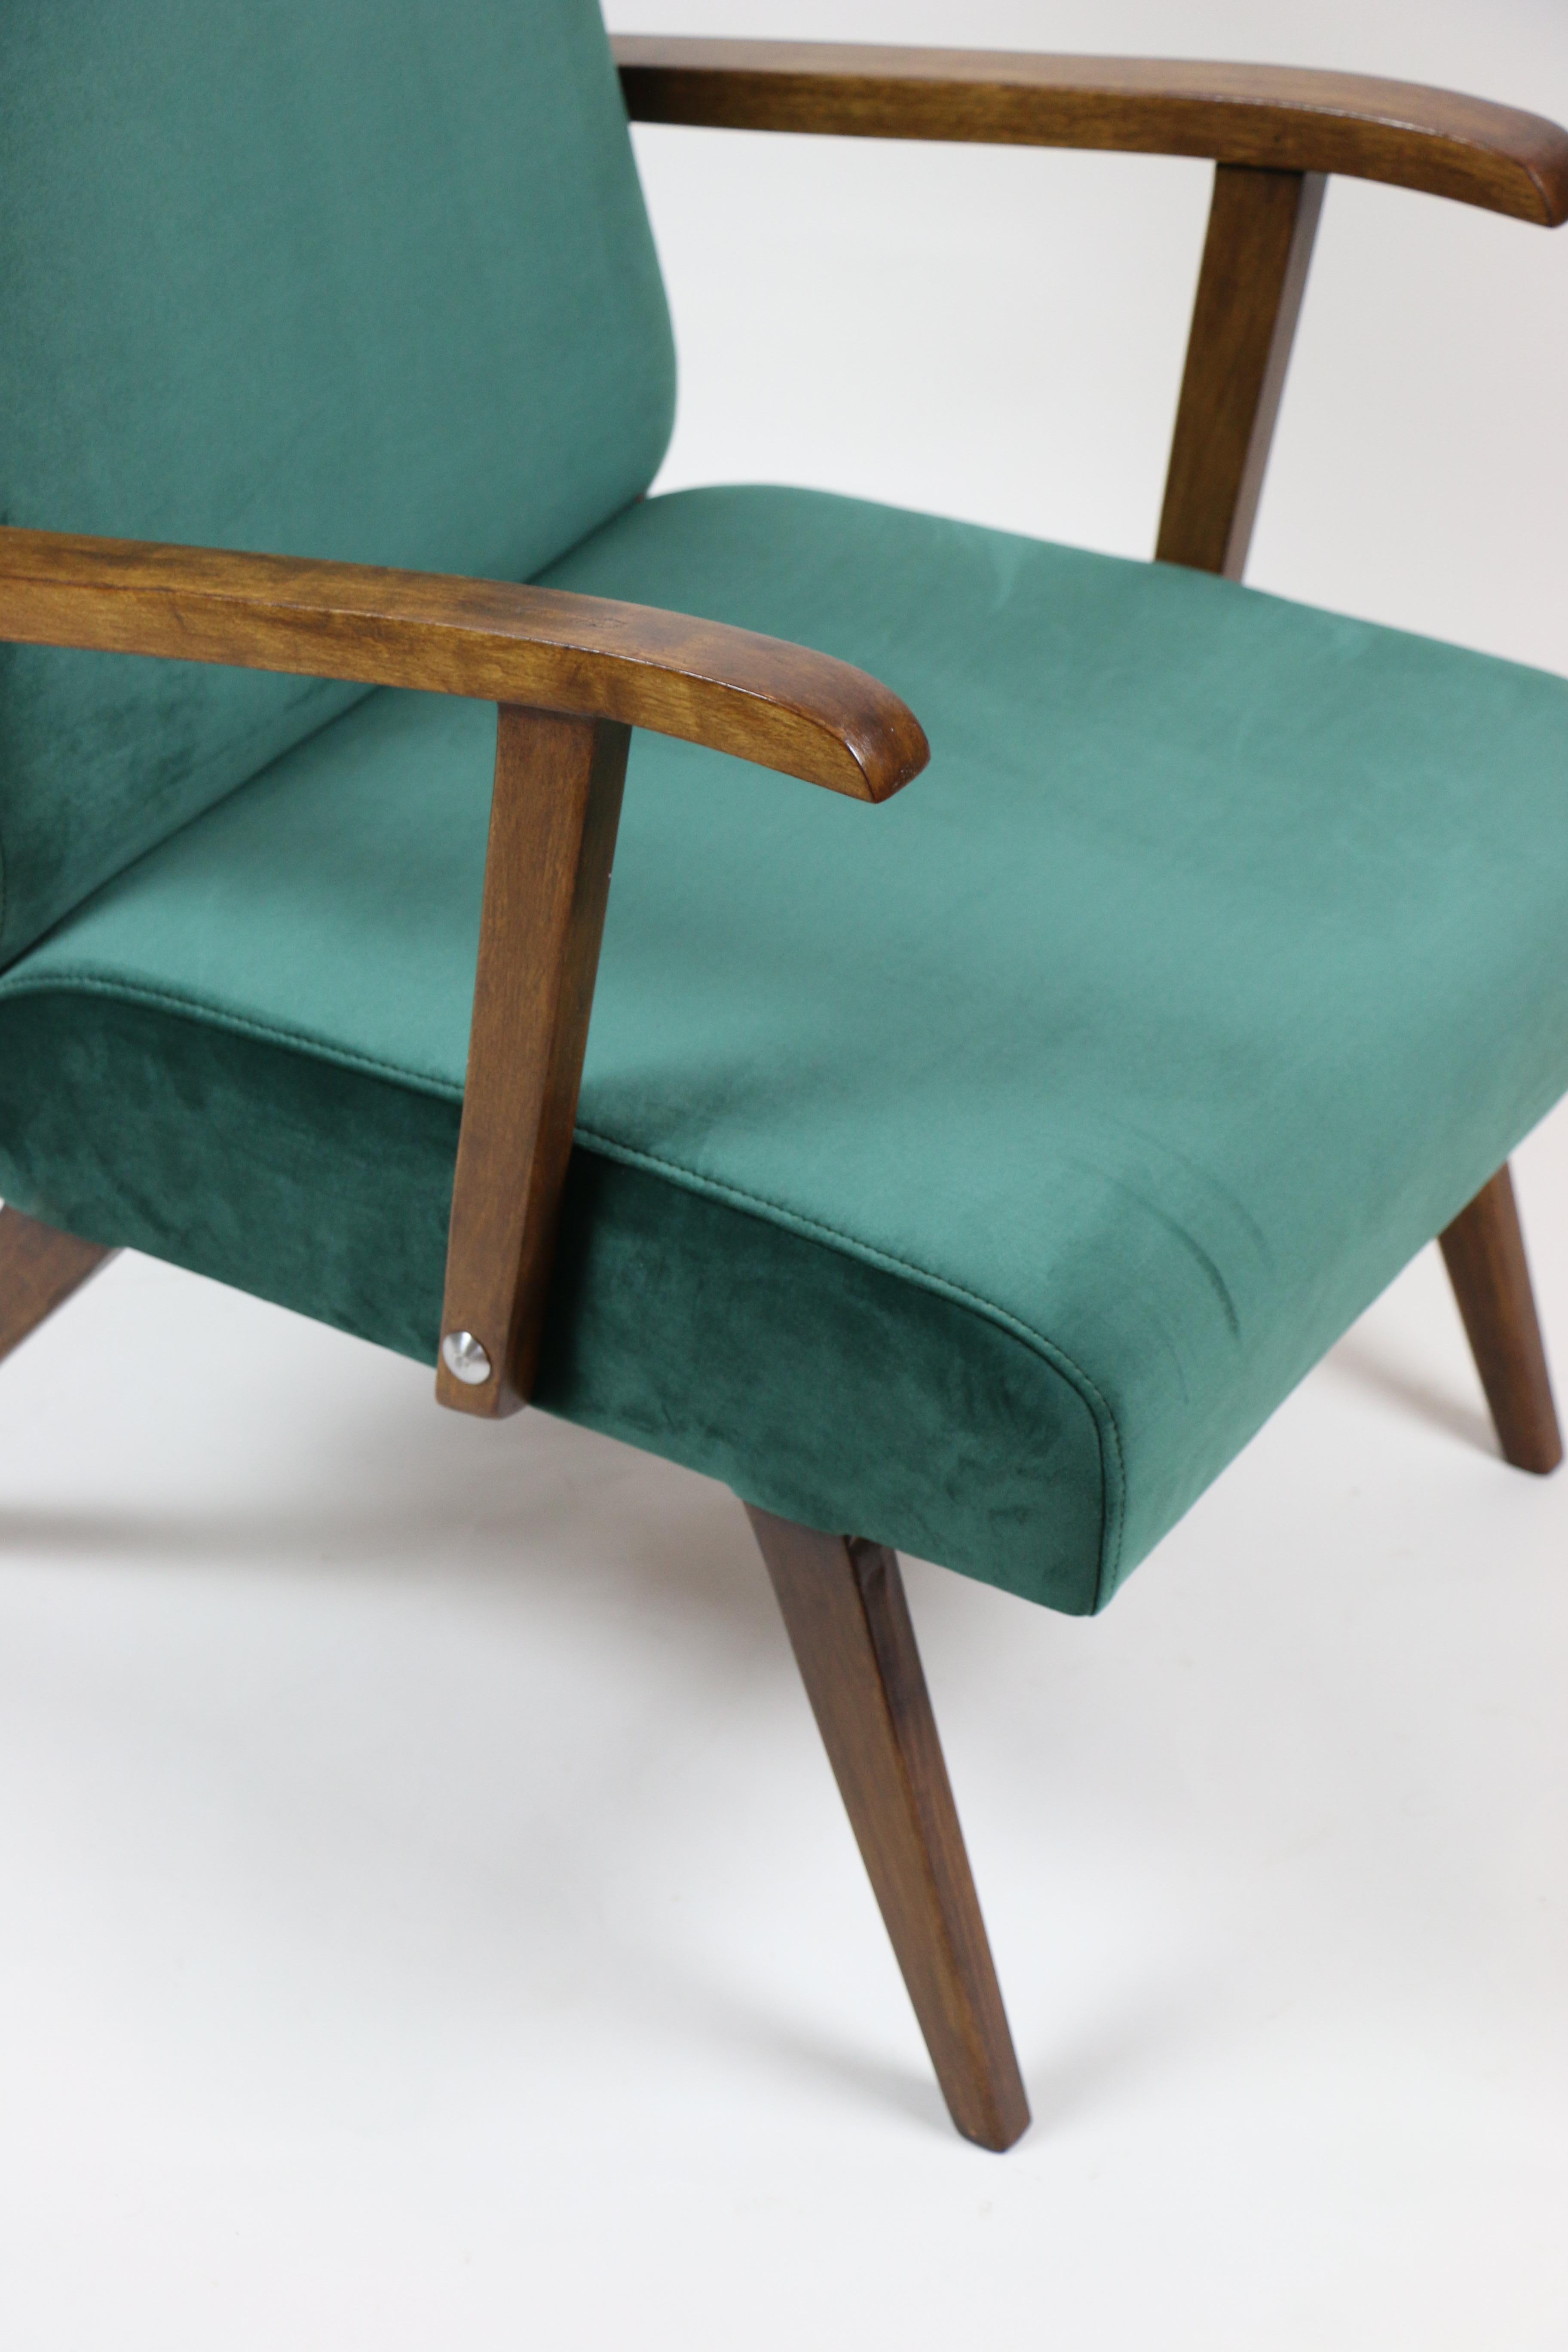 Polish Small Vintage Armchair in Green Velvet from 1970s For Sale